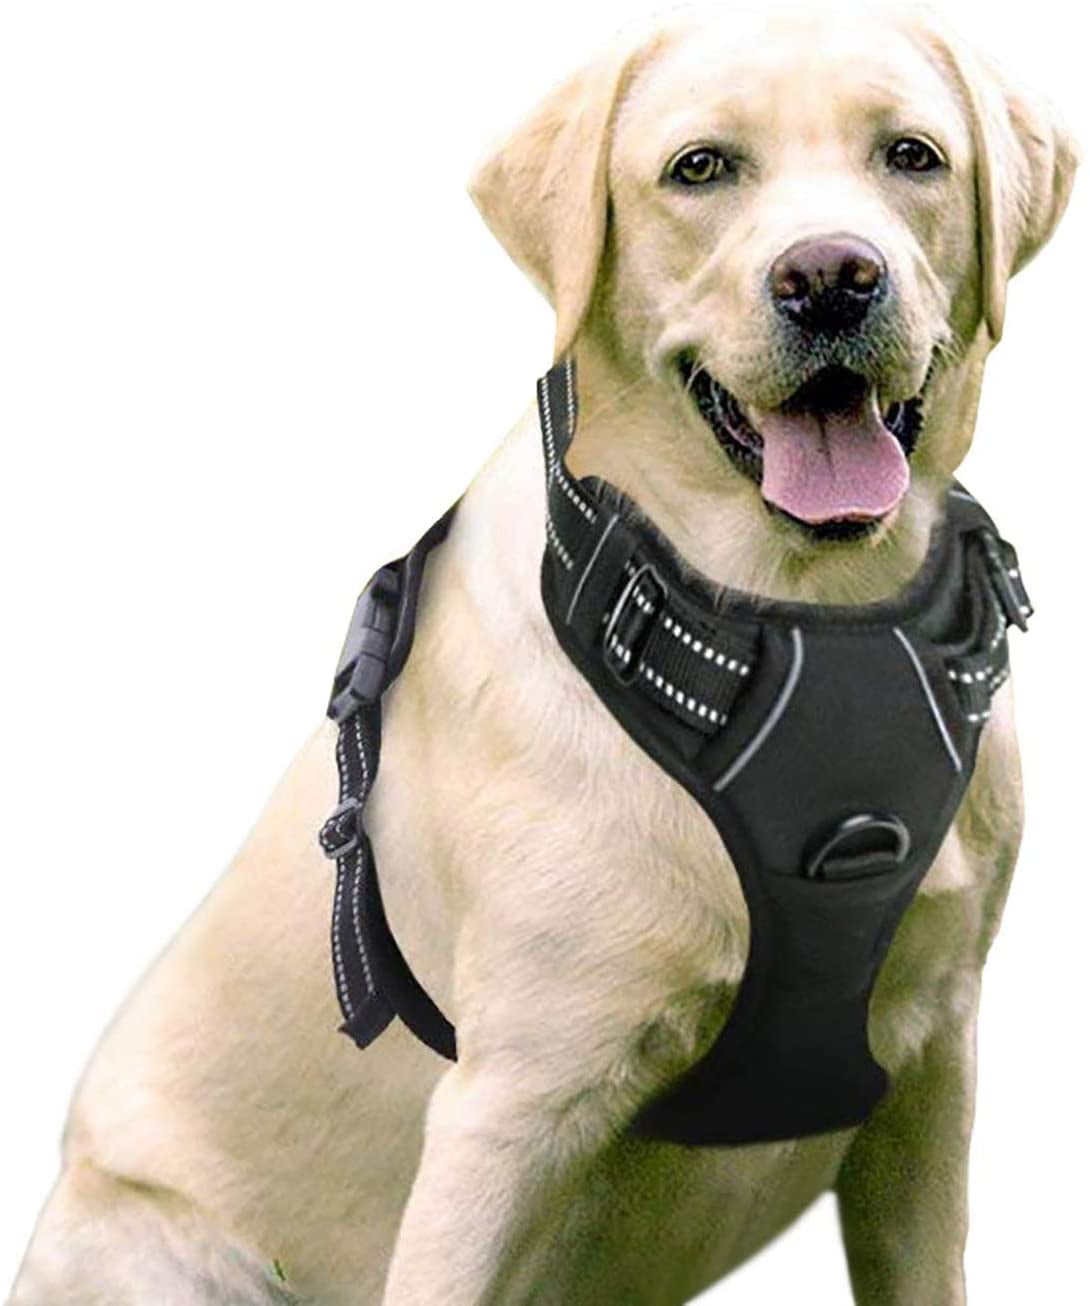 Quality Breathable Mesh Reflective Dog Harness Not Easy to Fall Lightweight Pet Comfort Harness Suitable for Medium and Small Cat and Dog Lattice Vest Type Dog Chest Harness 